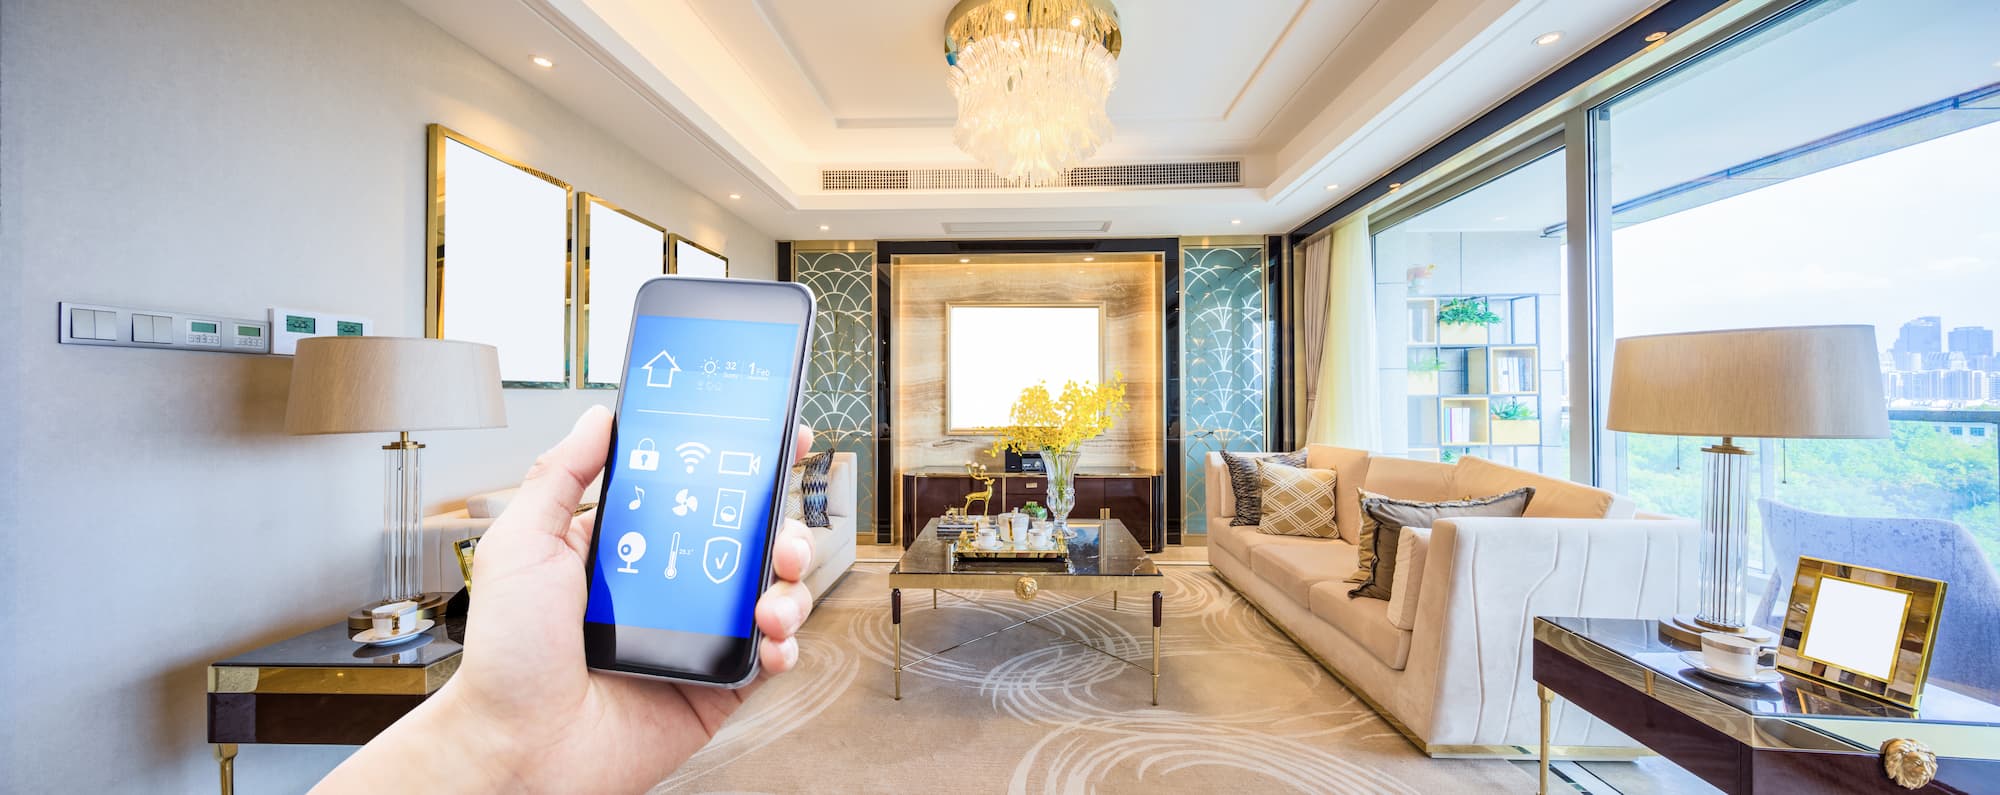 Smart Home Automation Ideas & Features